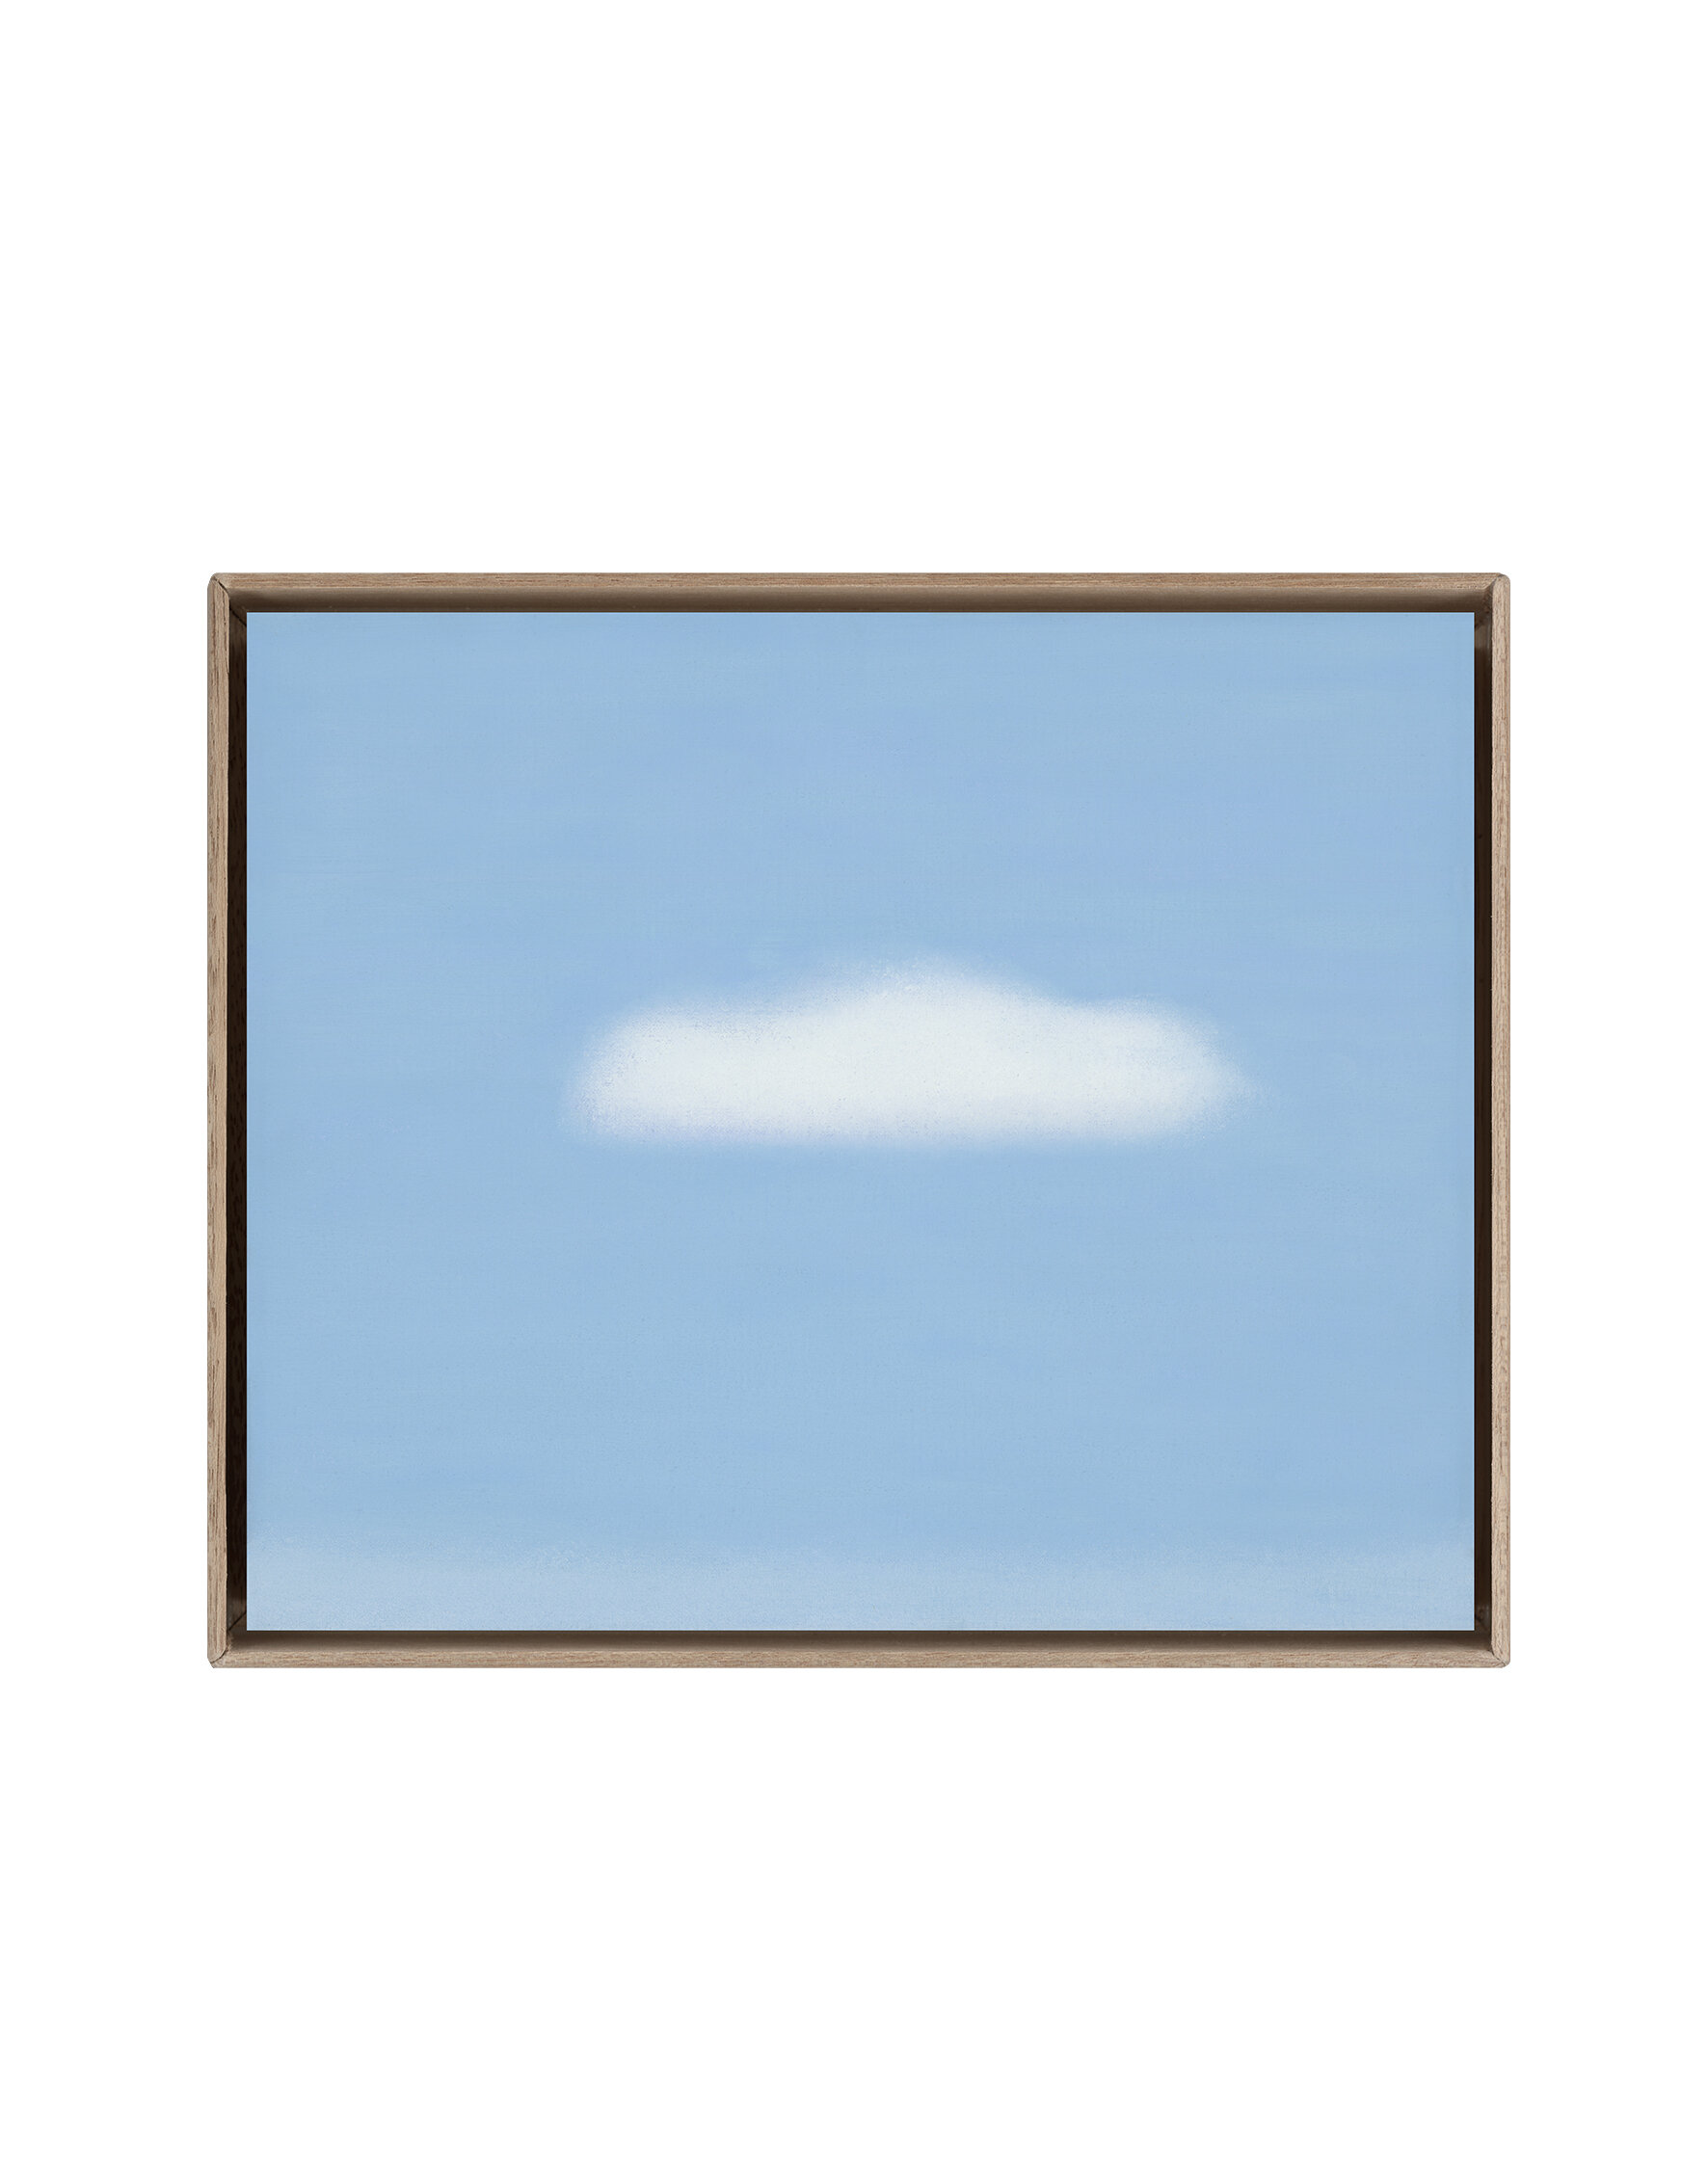 Title: One Cloud